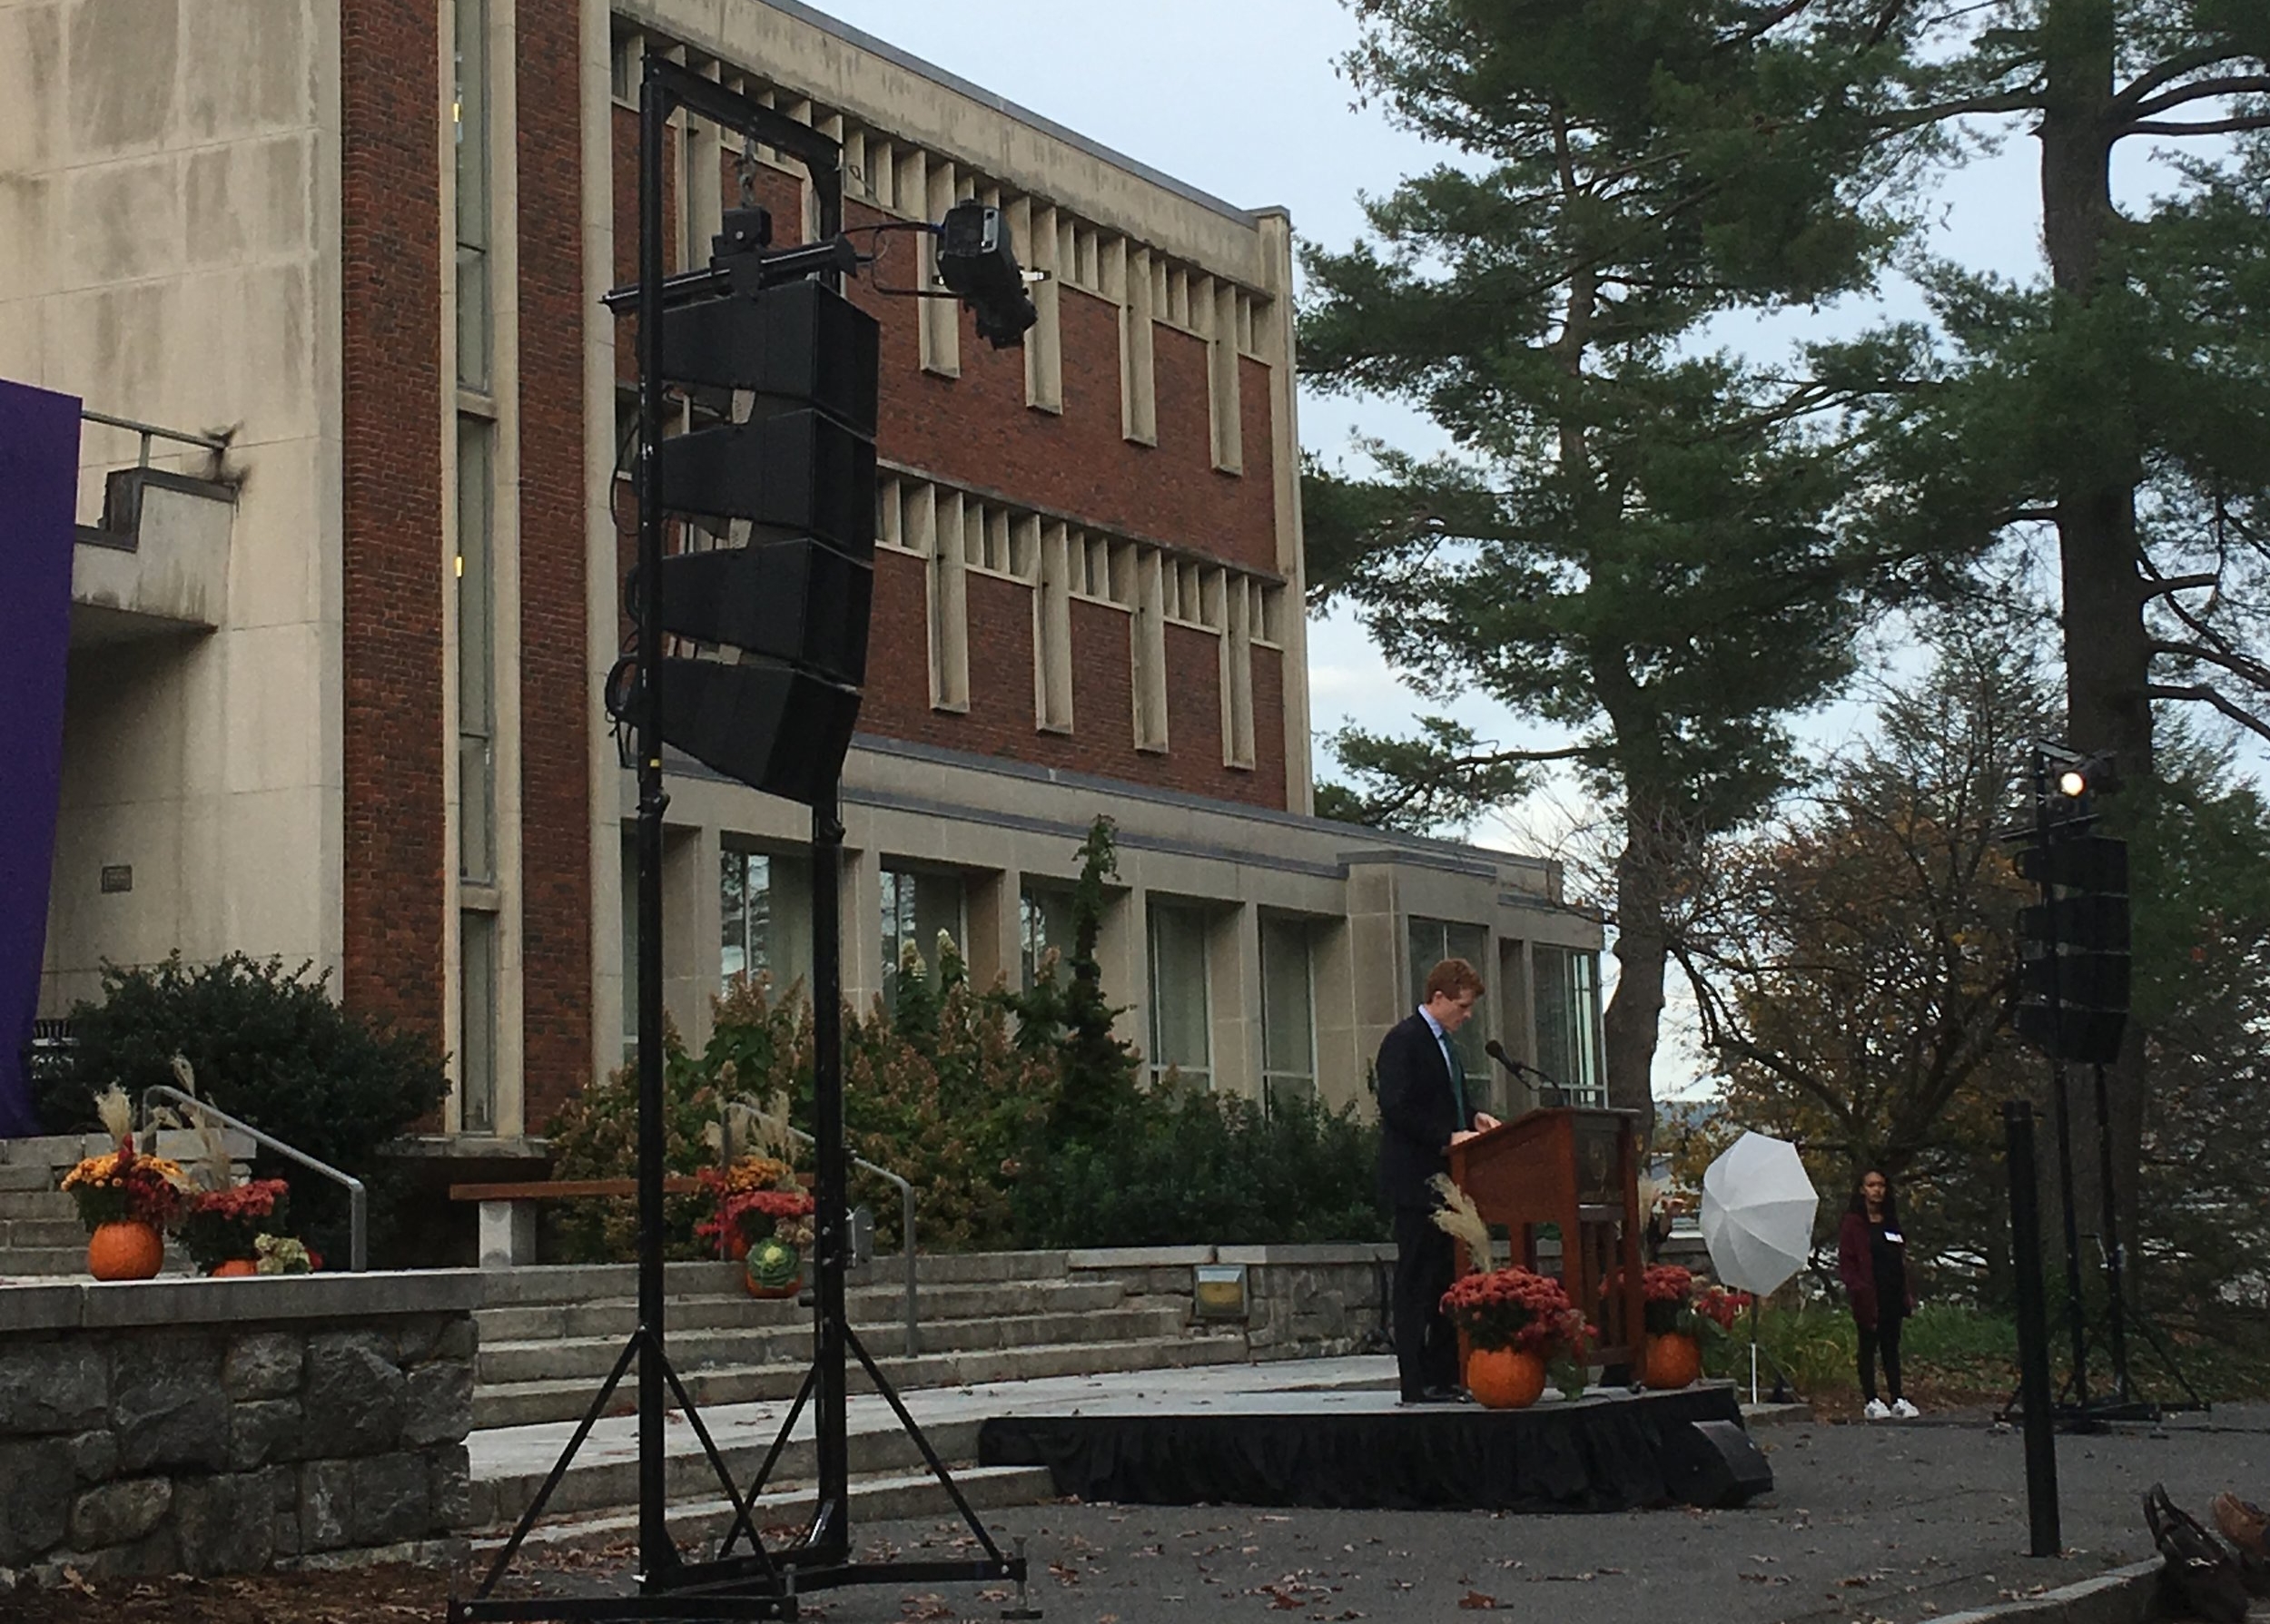  Rep. Joe Kennedy speaking in front of Frost Library at Amherst College. 